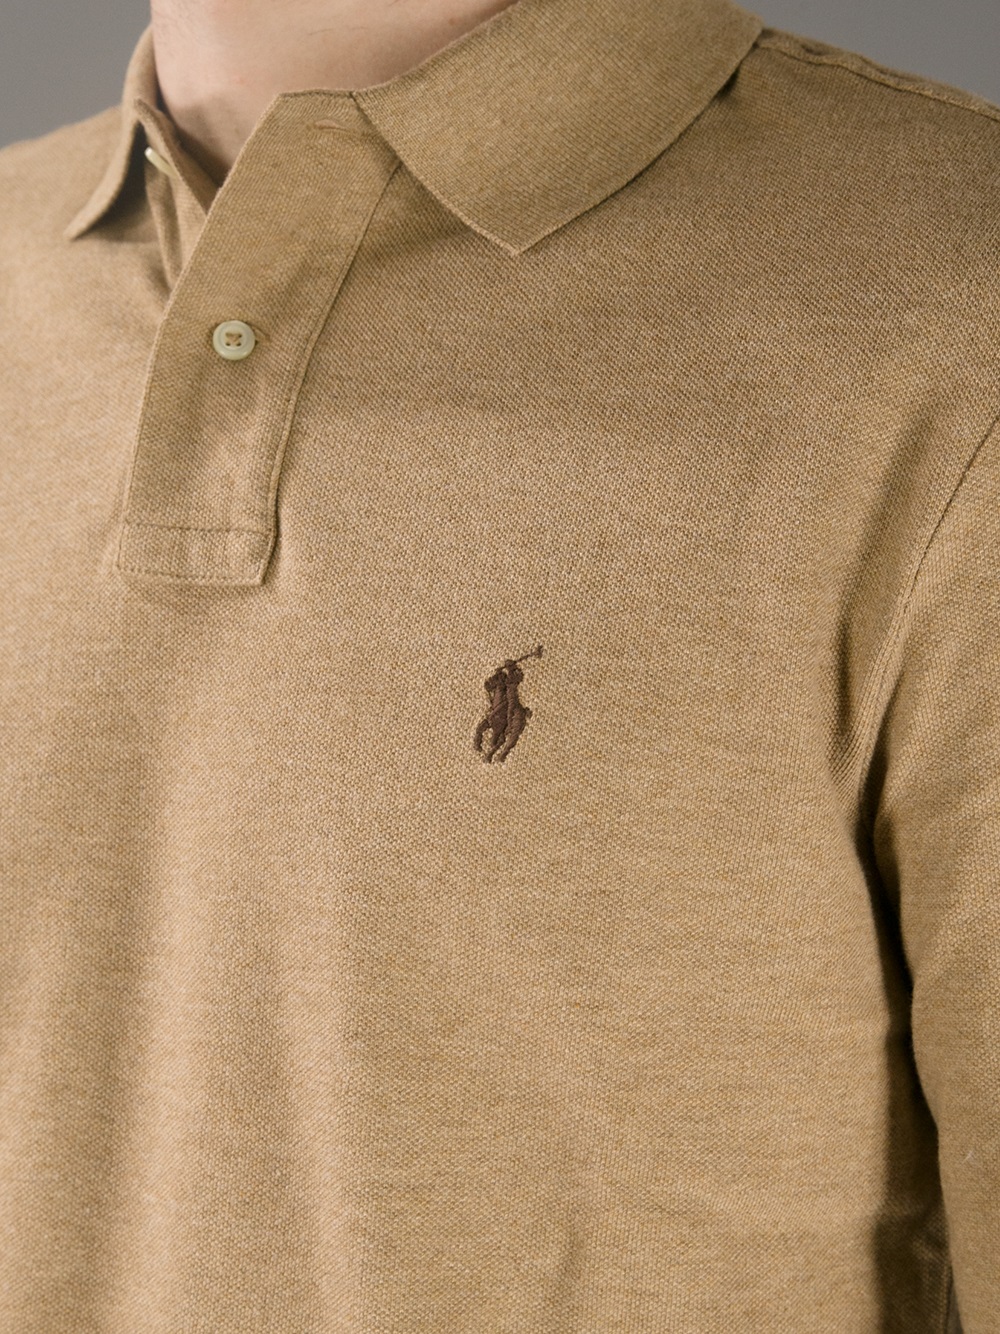 Polo Ralph Lauren Long Sleeve Polo Shirt in Brown for Men - Lyst